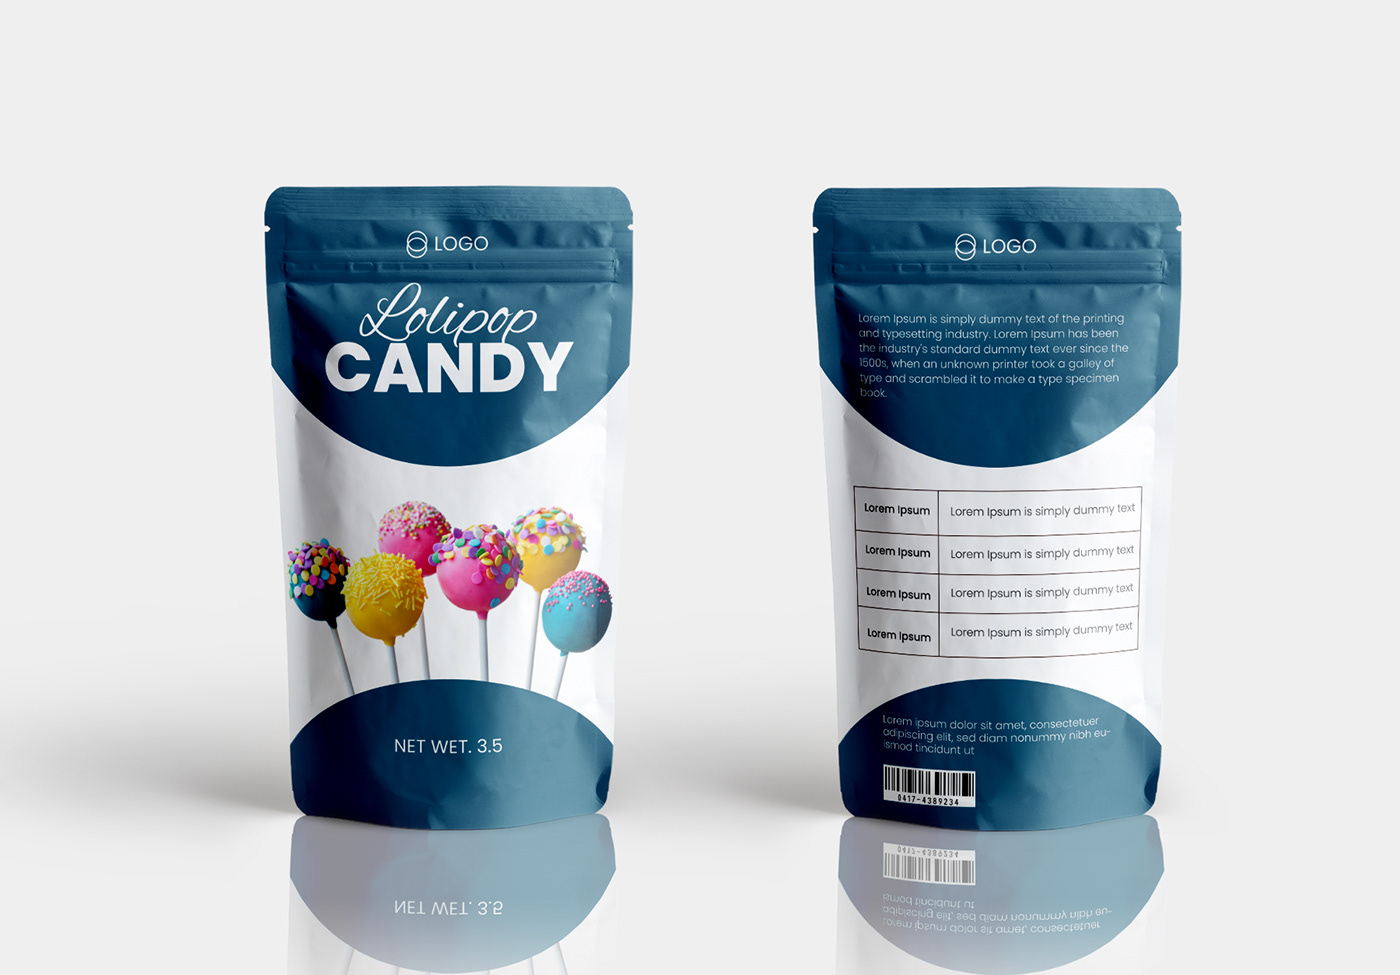 Candy candy packaging package design  Packaging design marketing   pouch packaging design product concept